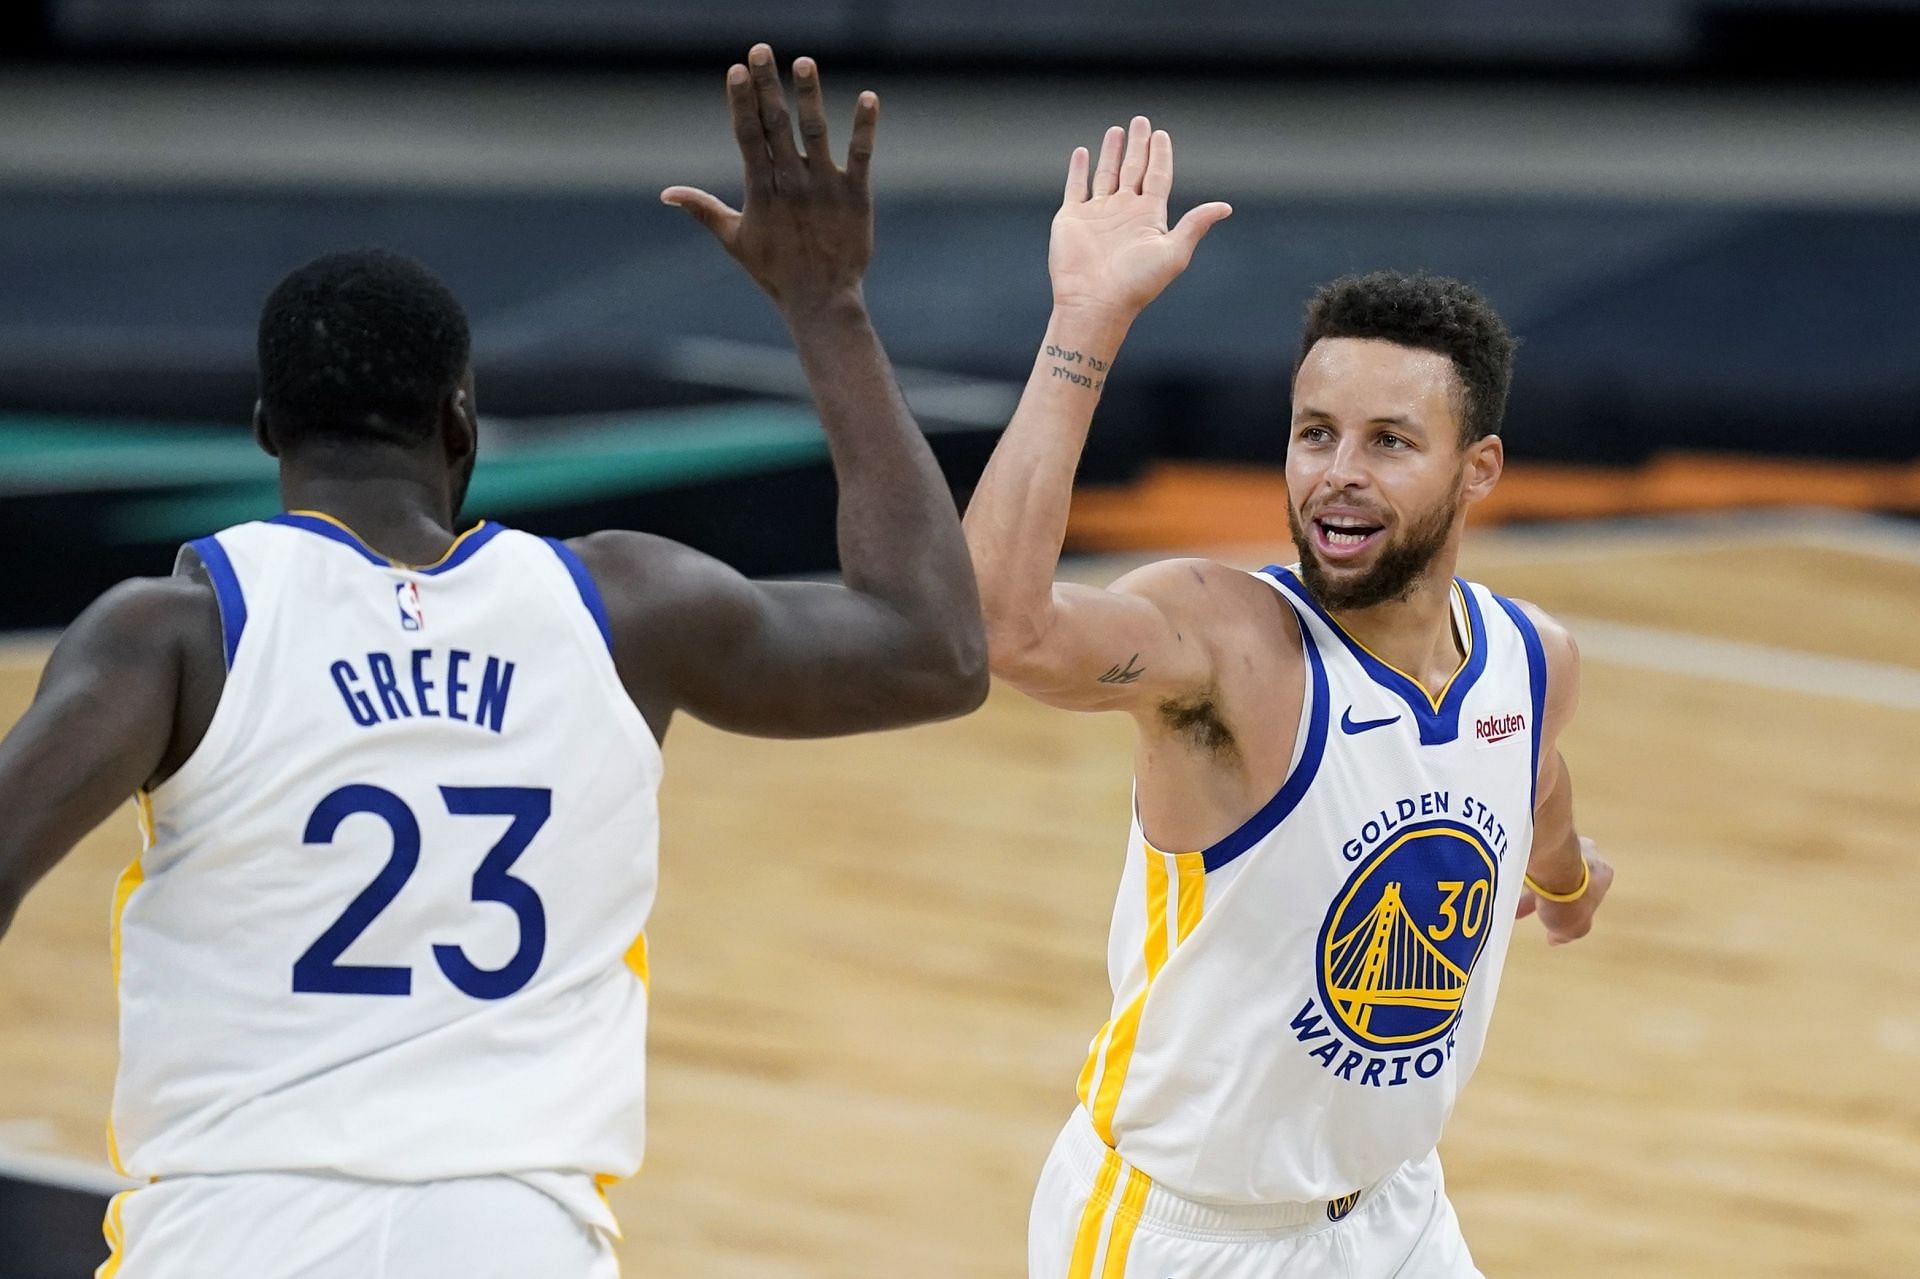 The Golden State Warriors eked out a win in Game 1 despite Draymond Green&#039;s ejection and Steph Curry&#039;s shooting struggles. [Photo: The Mercury News]